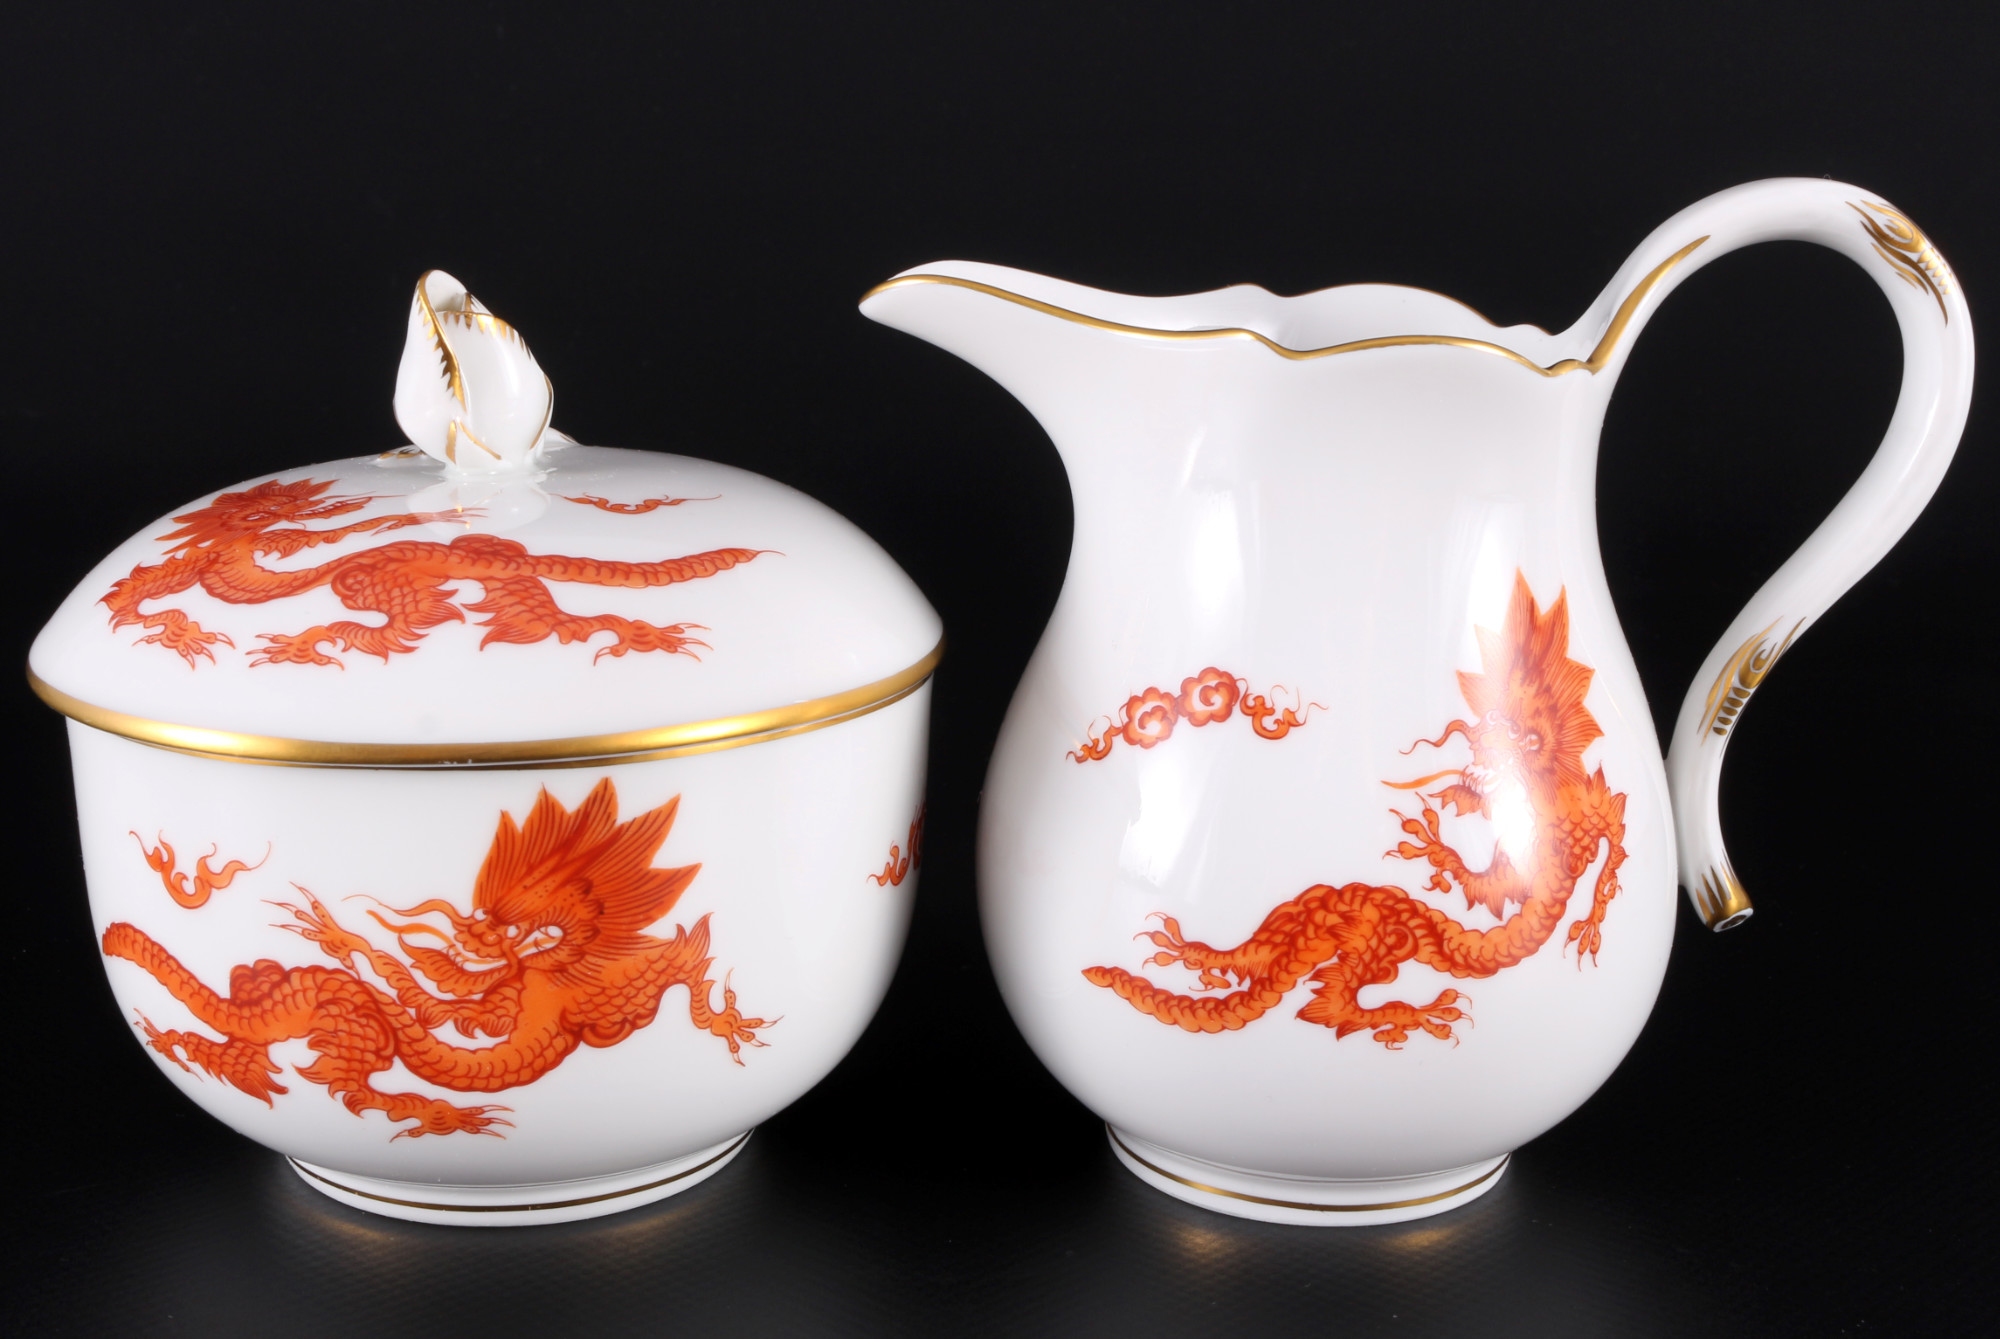 Meissen Red Ming Dragon coffee service for 8 pers. 1st choice, Mingdrache Kaffeeservice für 8 Person - Image 4 of 6